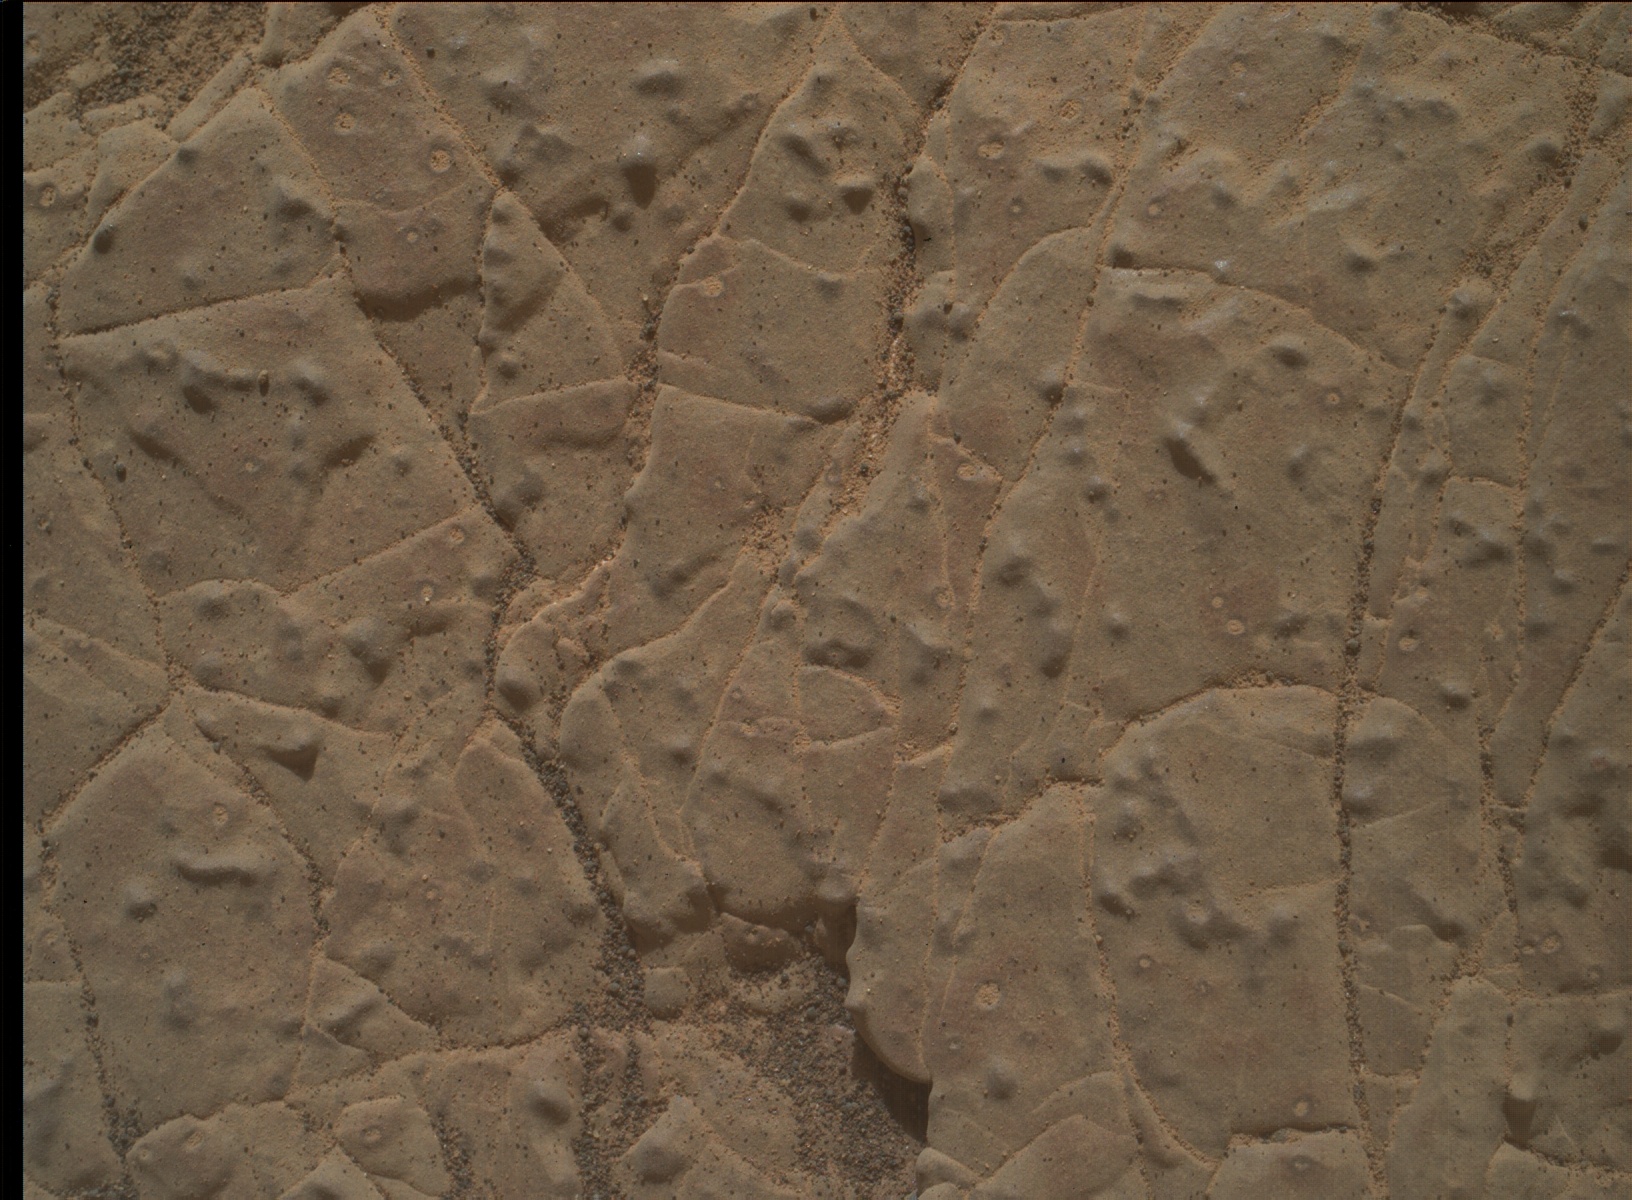 Nasa's Mars rover Curiosity acquired this image using its Mars Hand Lens Imager (MAHLI) on Sol 3004